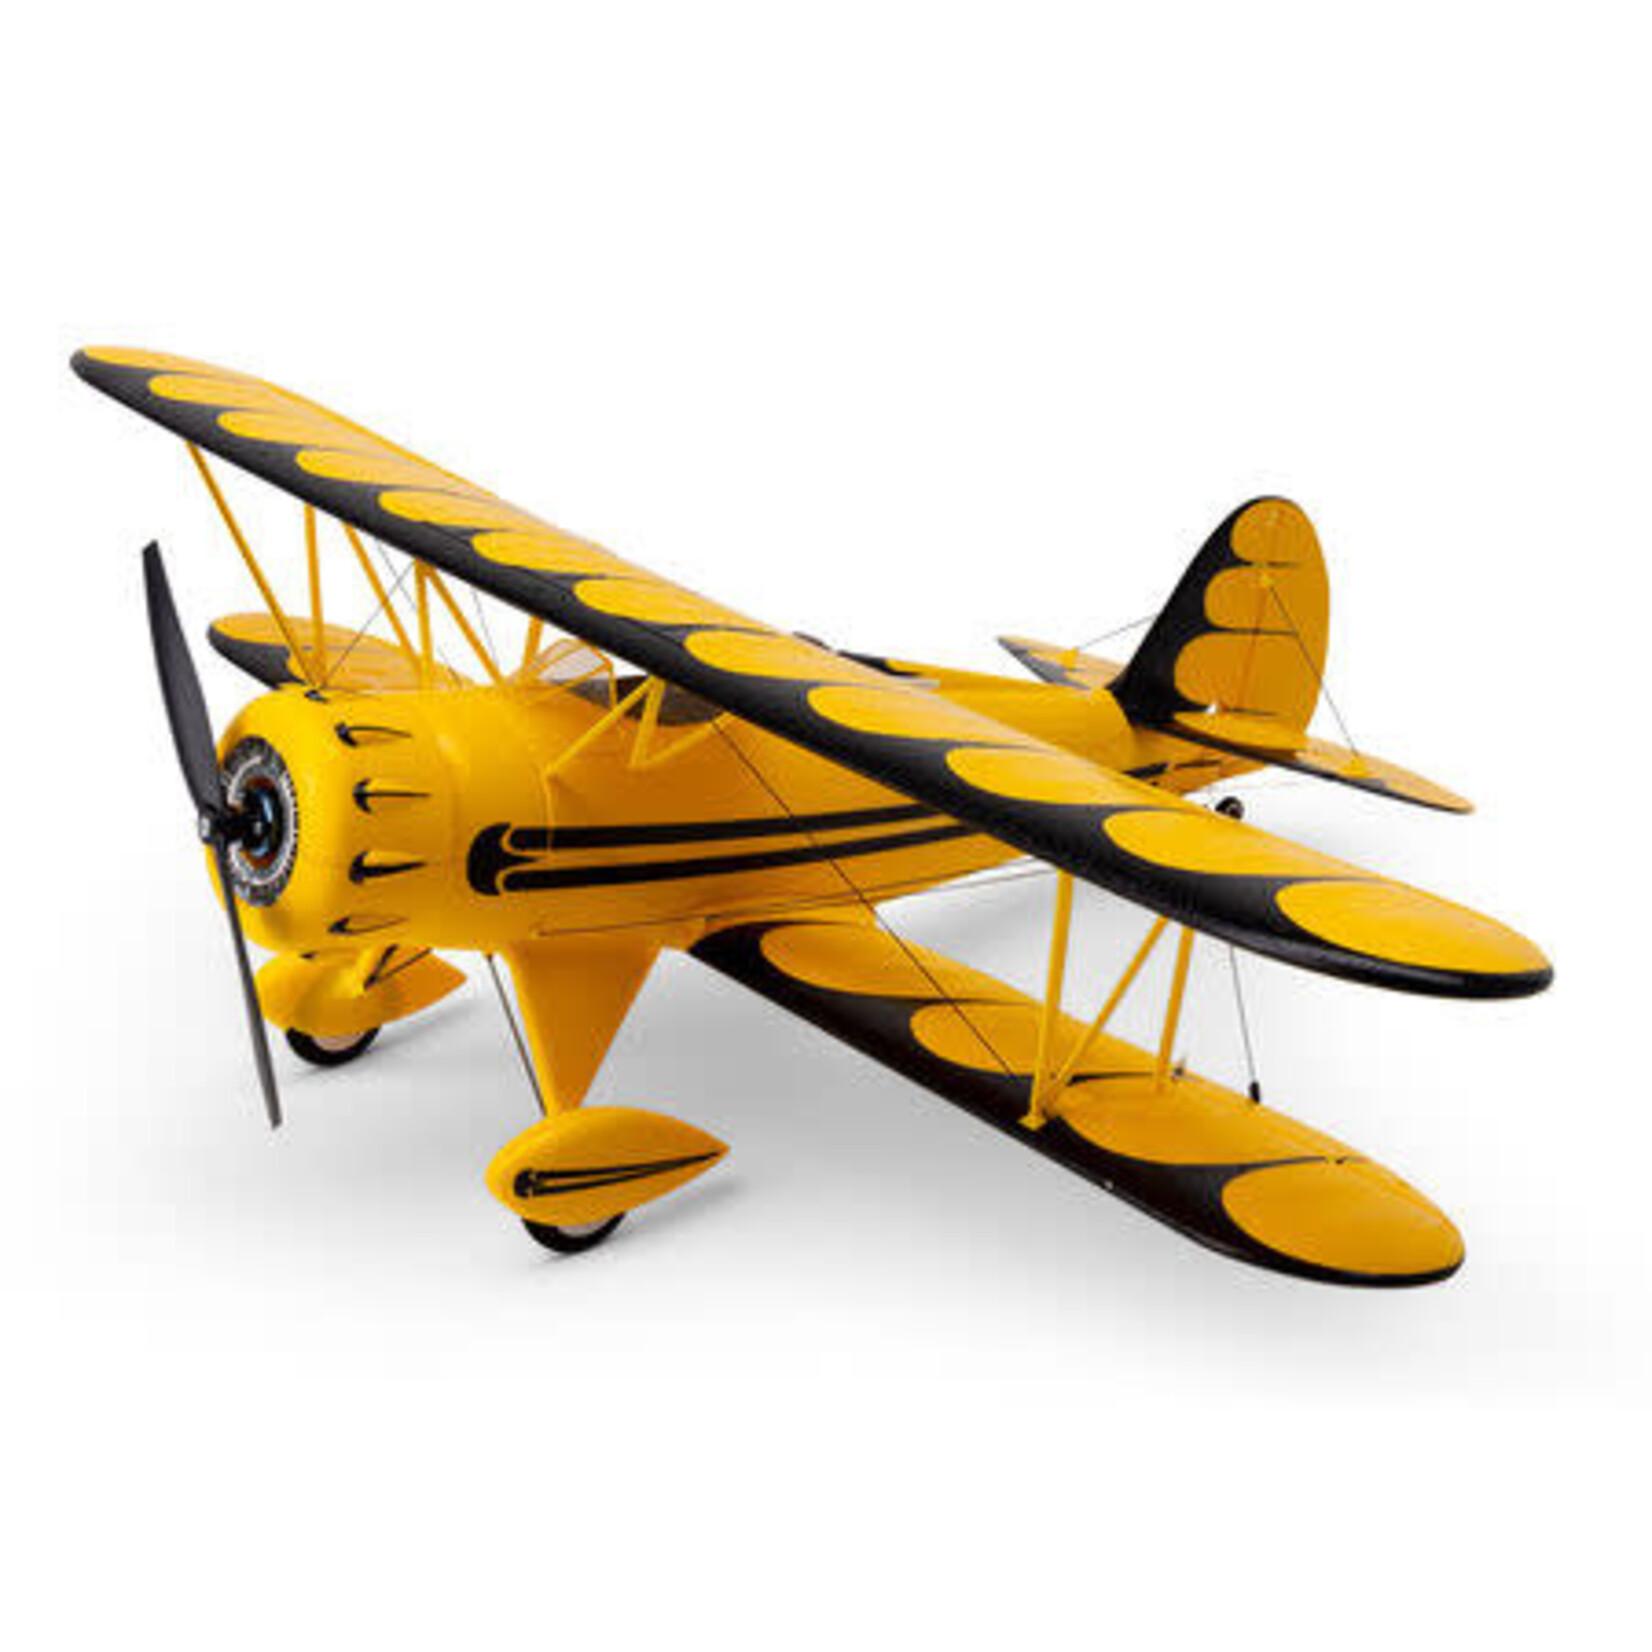 Eflite EFLU53550Y  UMX WACO BNF Basic with AS3X and SAFE Select, Yellow